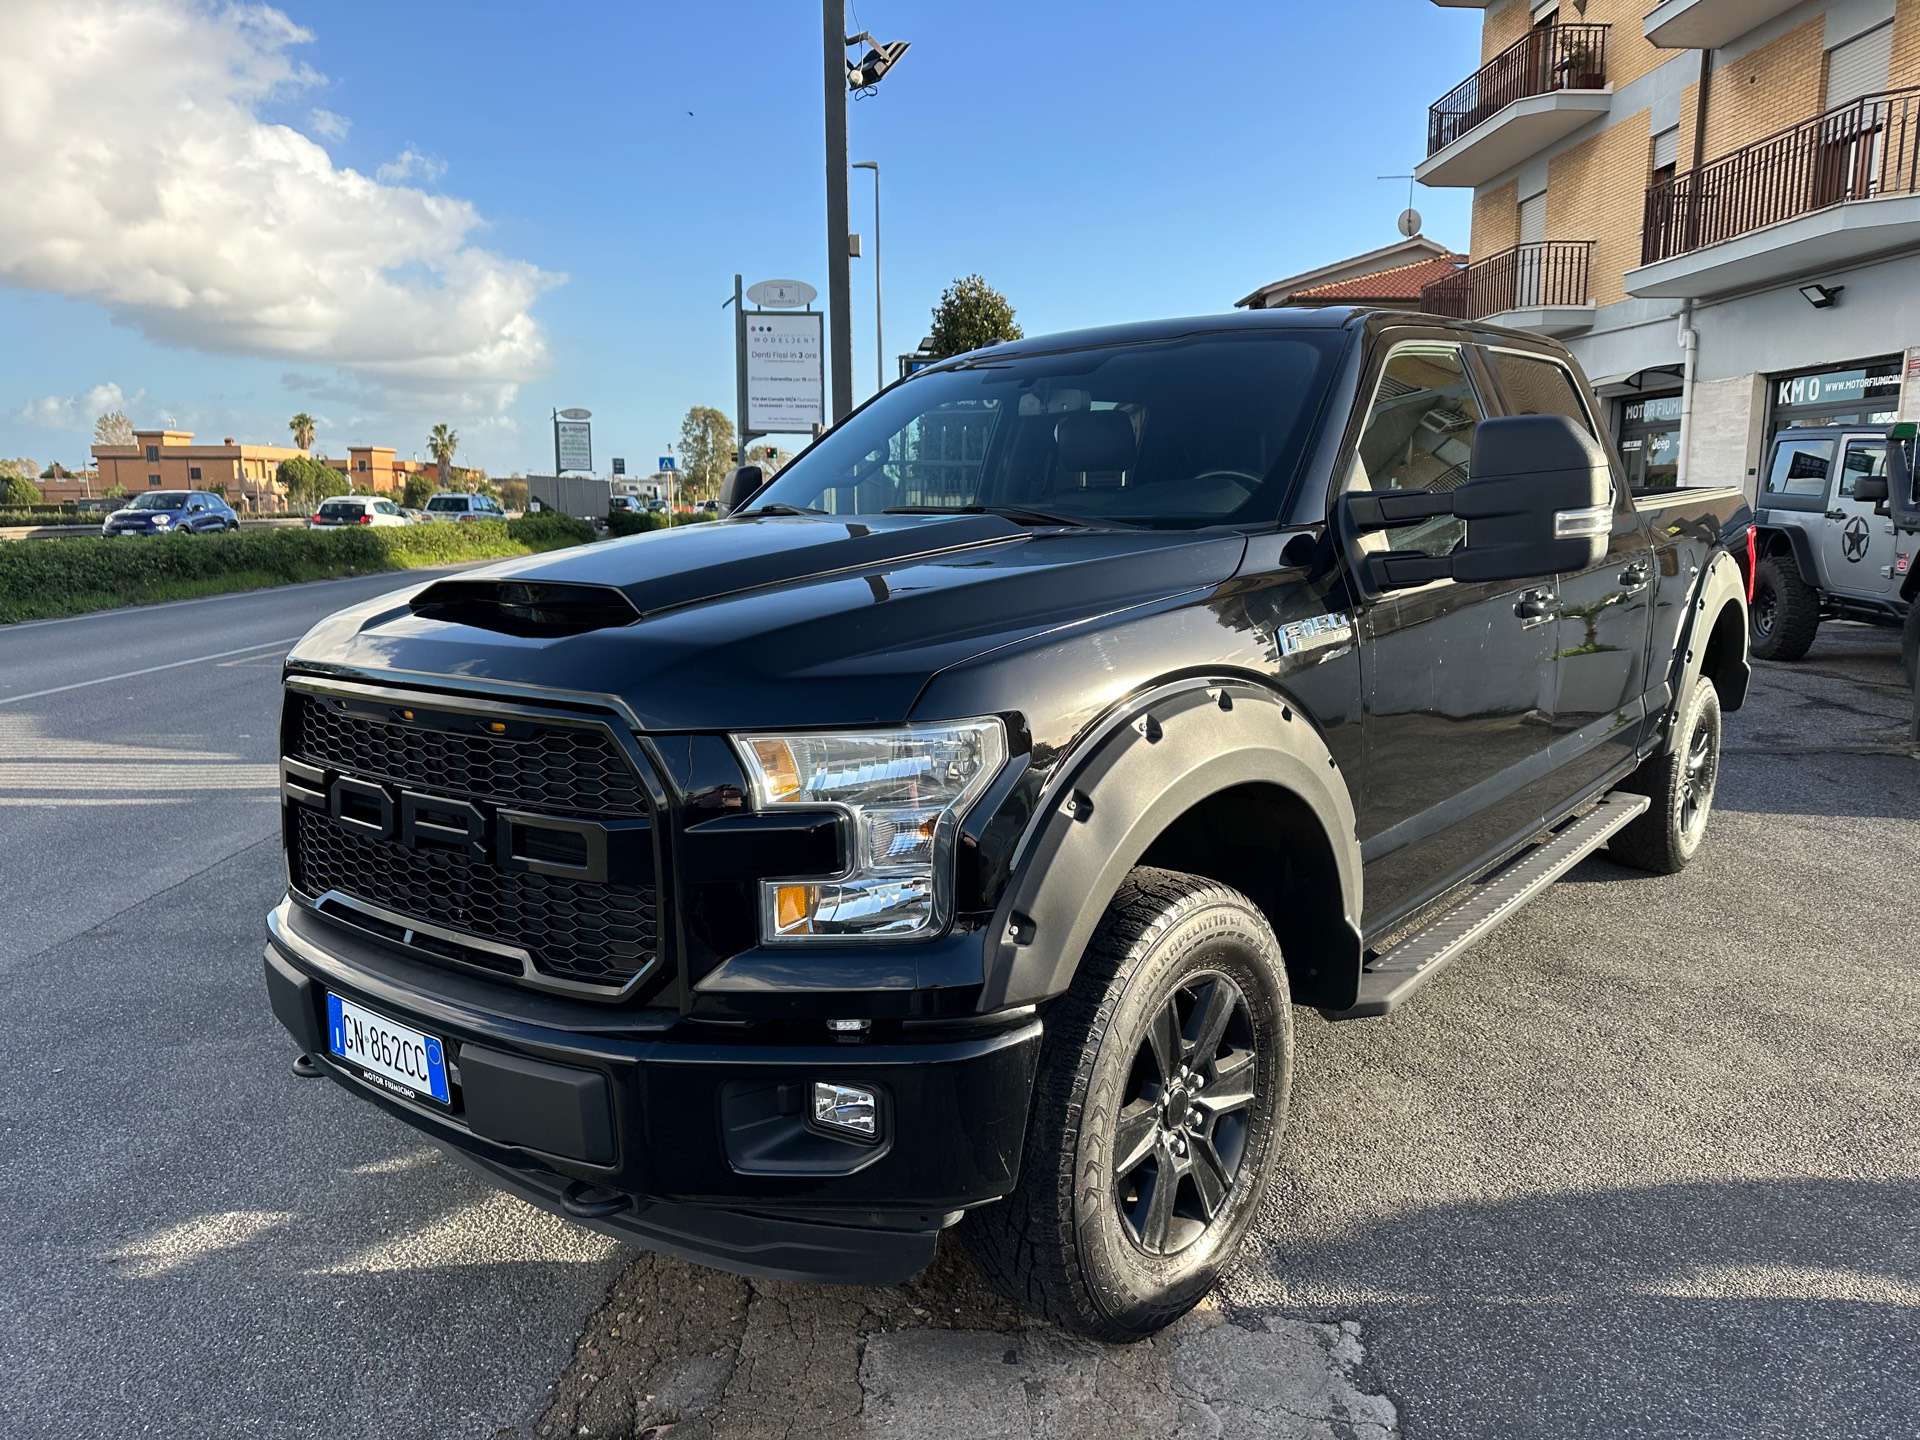 Ford F 150 Off-Road/Pick-up in Black used in Fiumicino - Rm for € 54,900.-